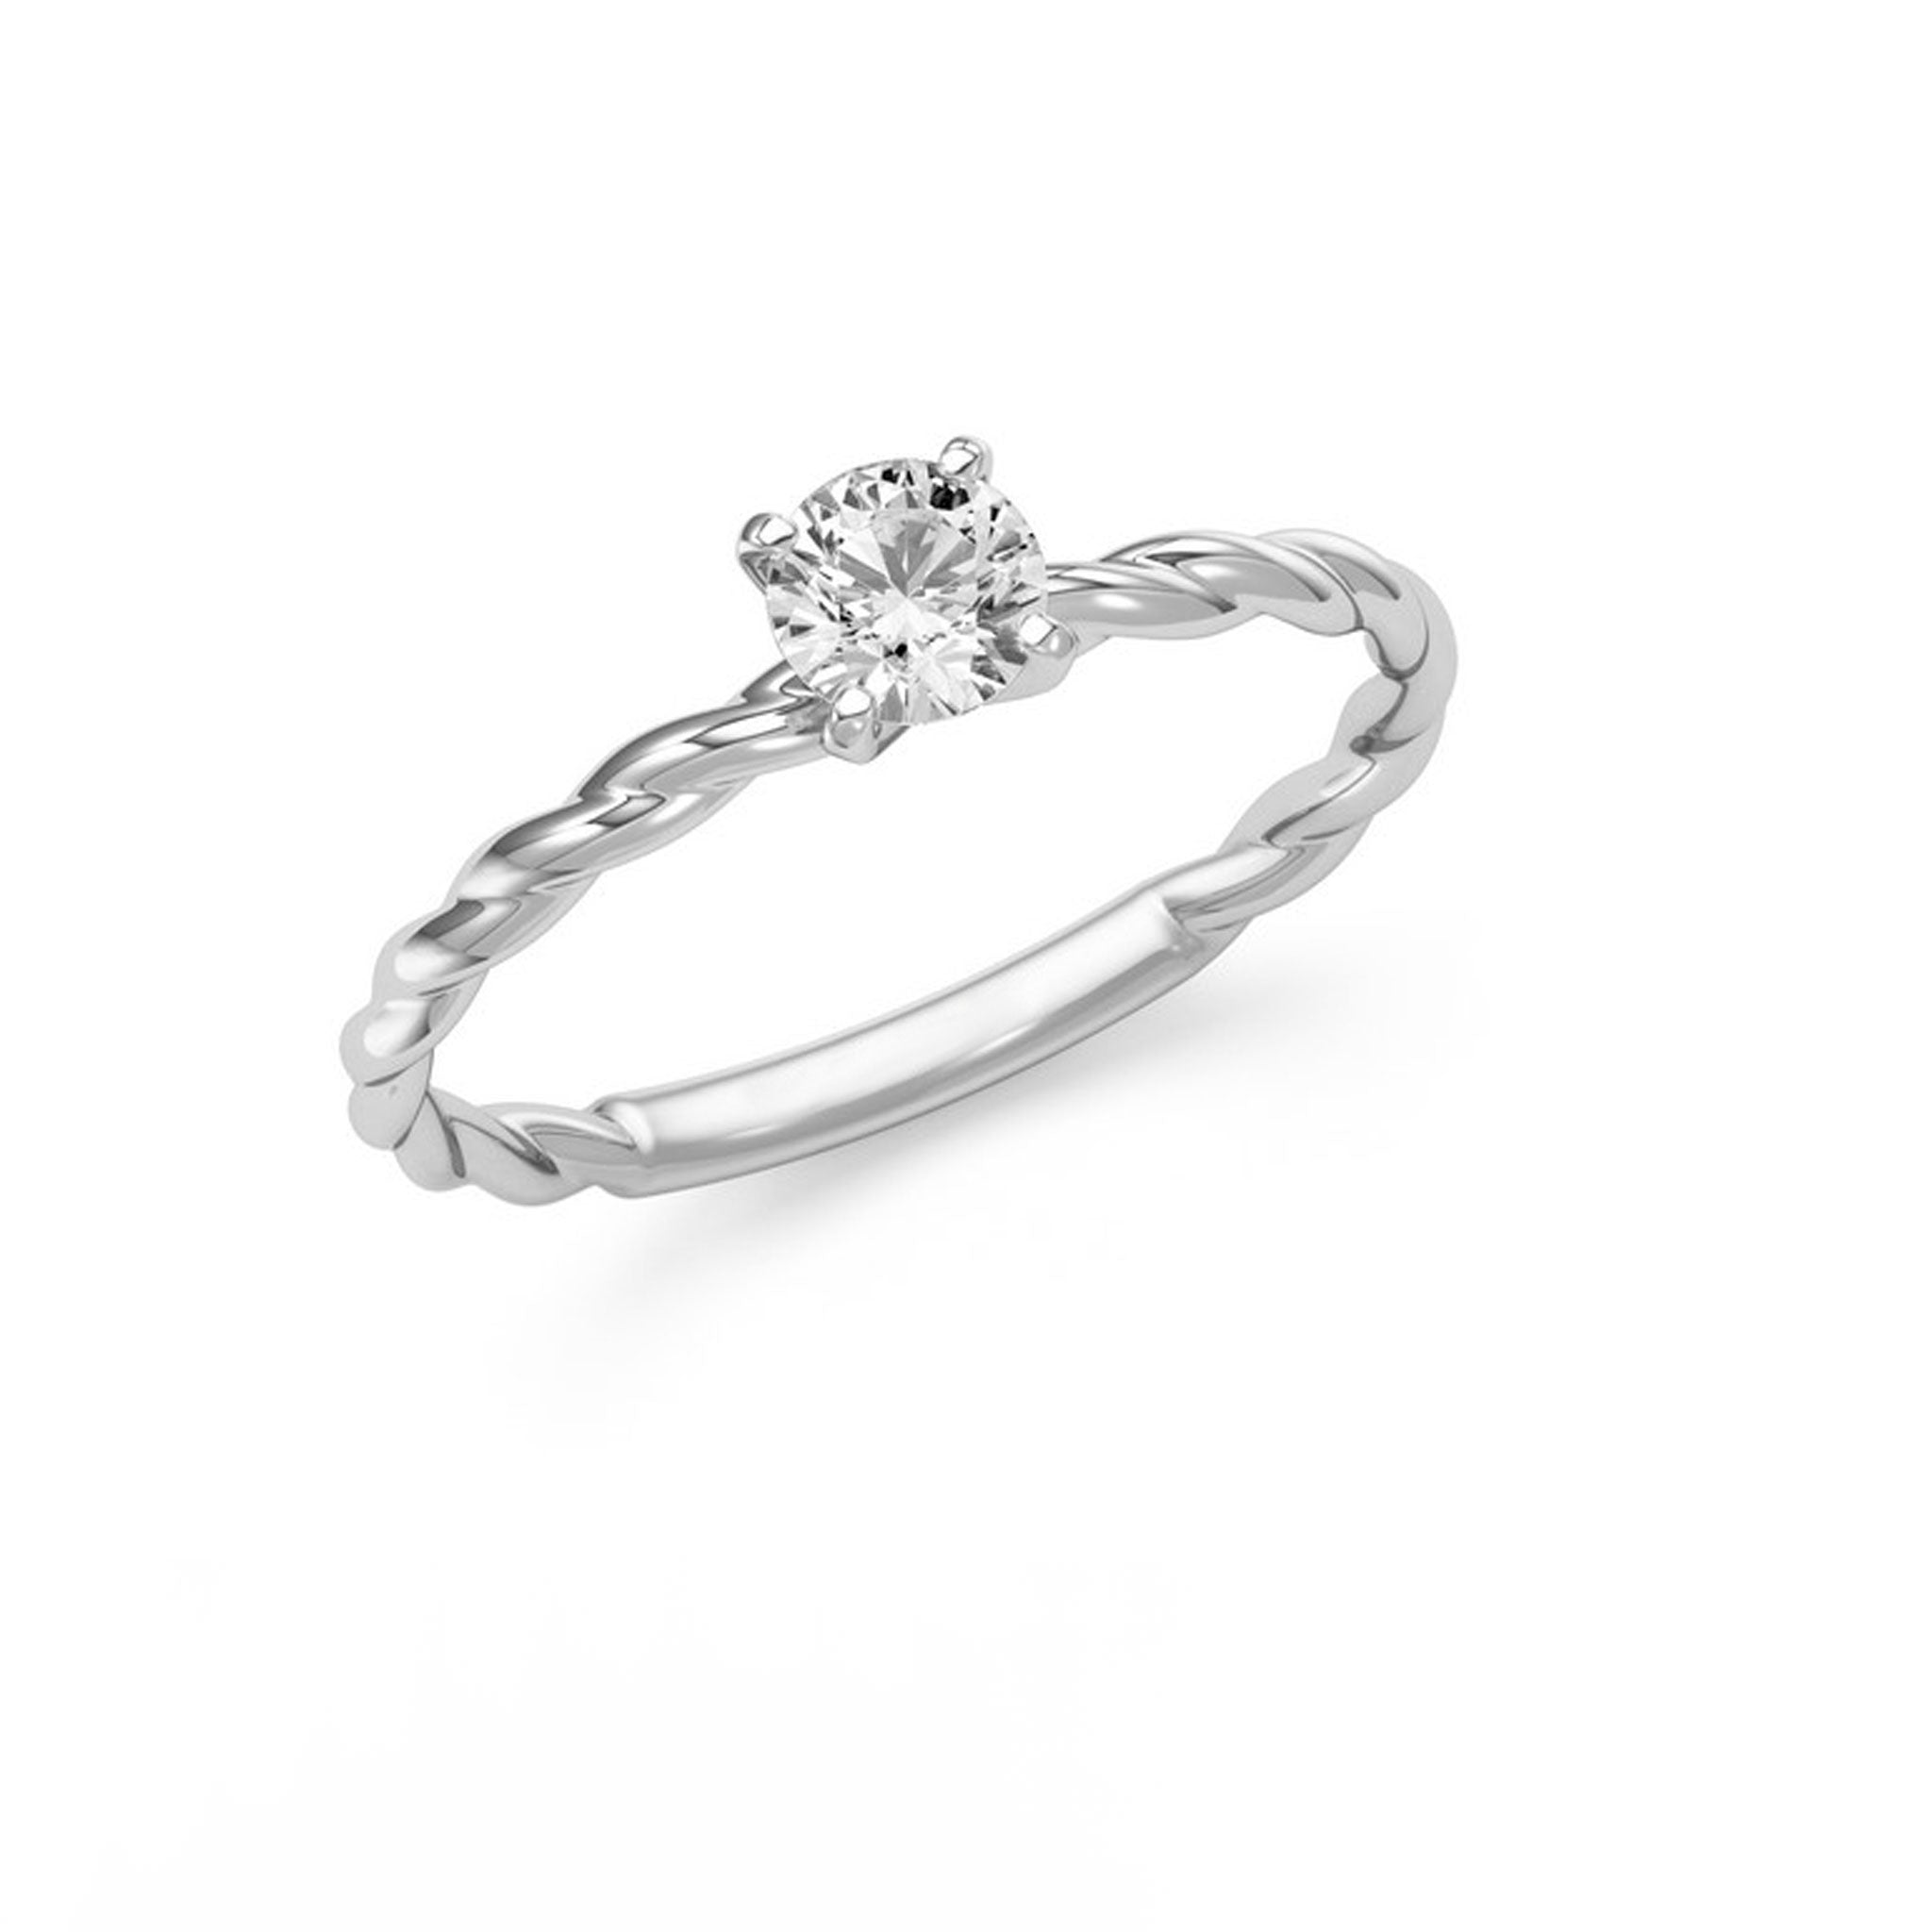 Best Selling Classical Design White Gold 1 Carat Moissanite Diamond Ring  For Wedding From Lym8689, $99.5 | DHgate.Com